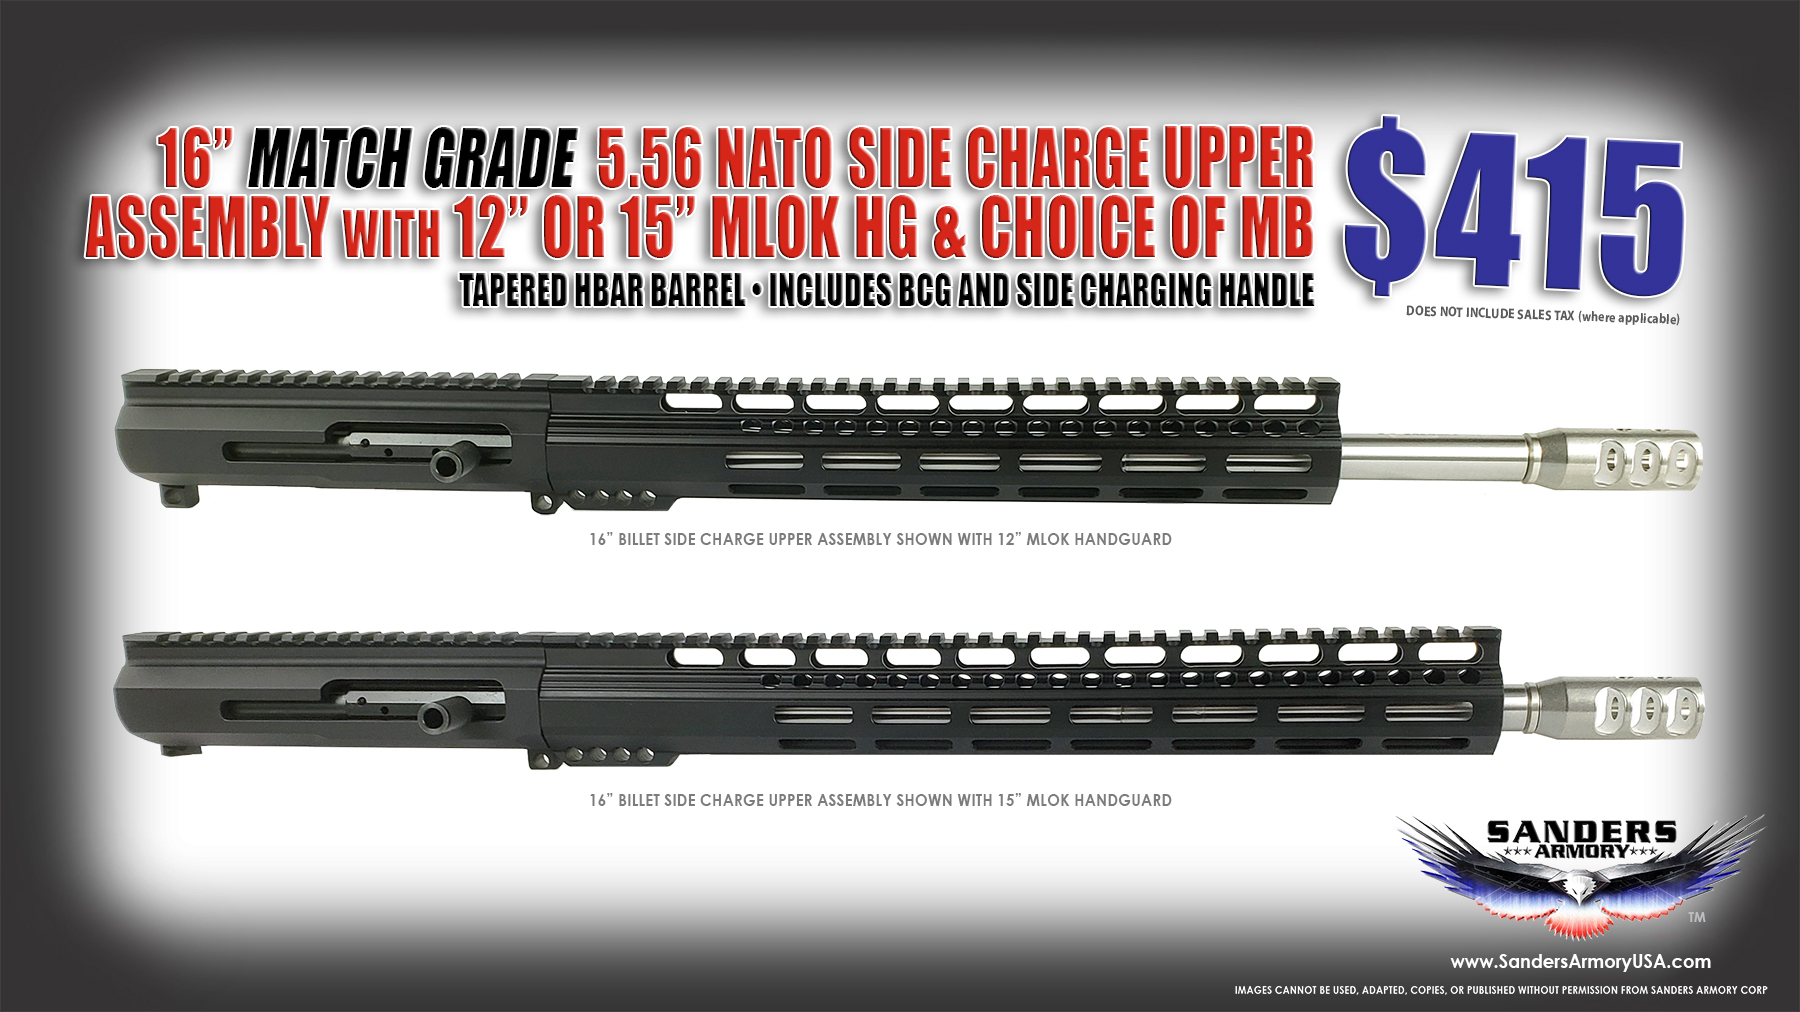 Sanders Armory 16 Match Grade 556 NATO-TFC-SIDE CHARGE Upper Assembly